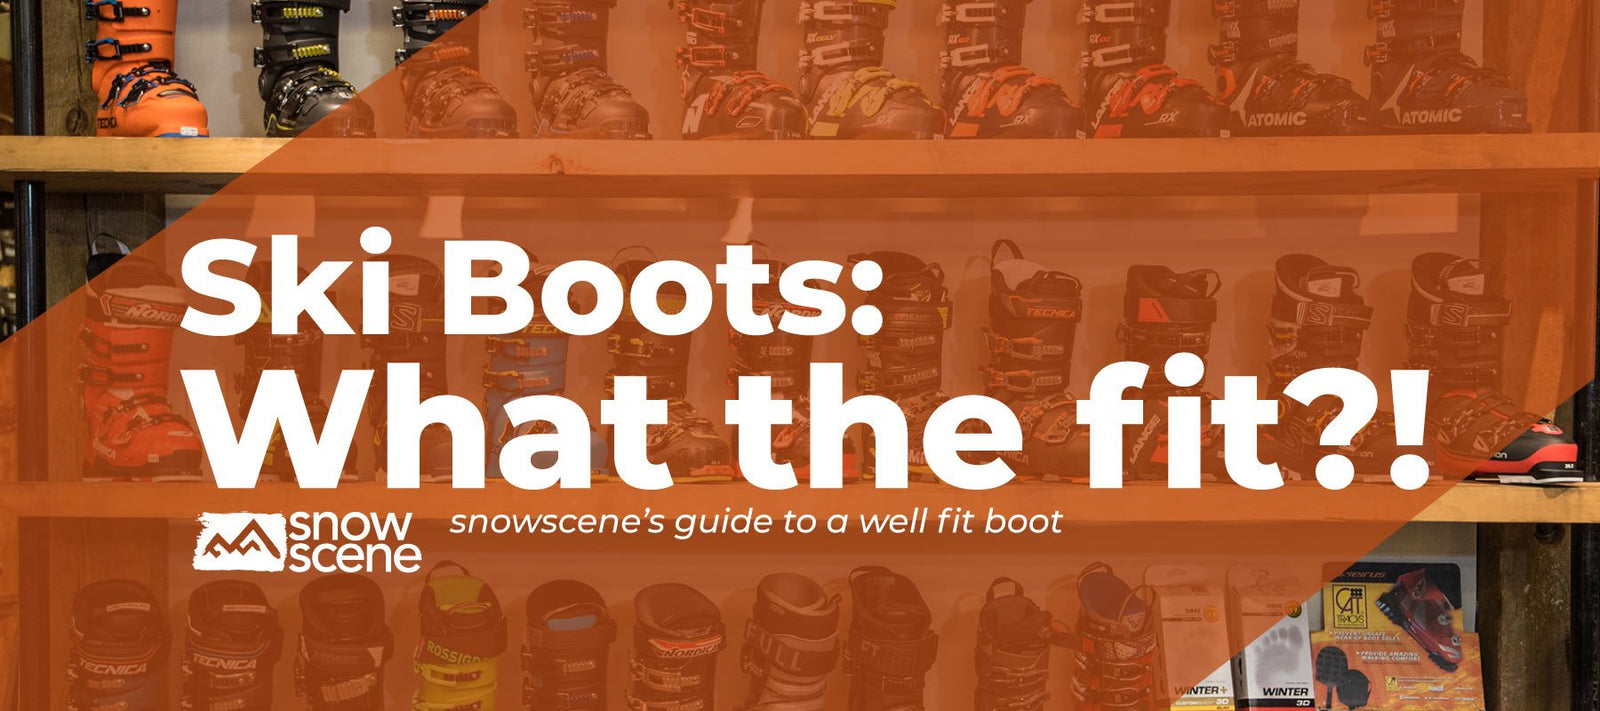 Ski Boots What the fit! (Boot fitting tips and guide) buy ski boots online, buying ski boots, comfortable ski boots and more Snowscene Ski and Board Snowscene and Mt Ruapehu blog